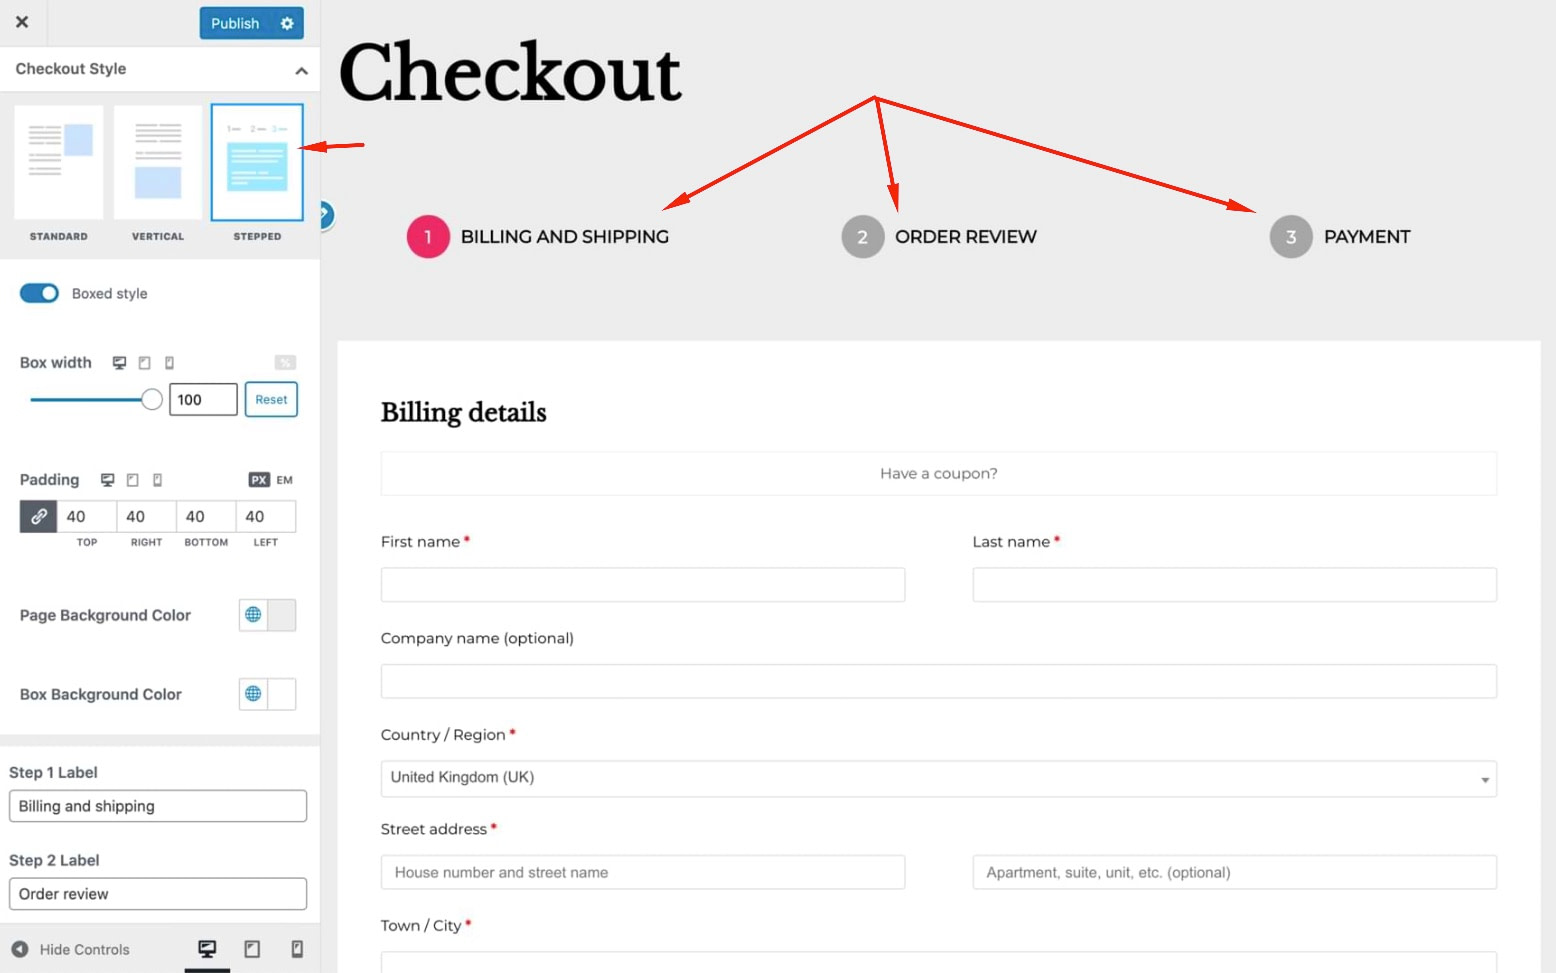 The stepped checkout experience for easier check outs